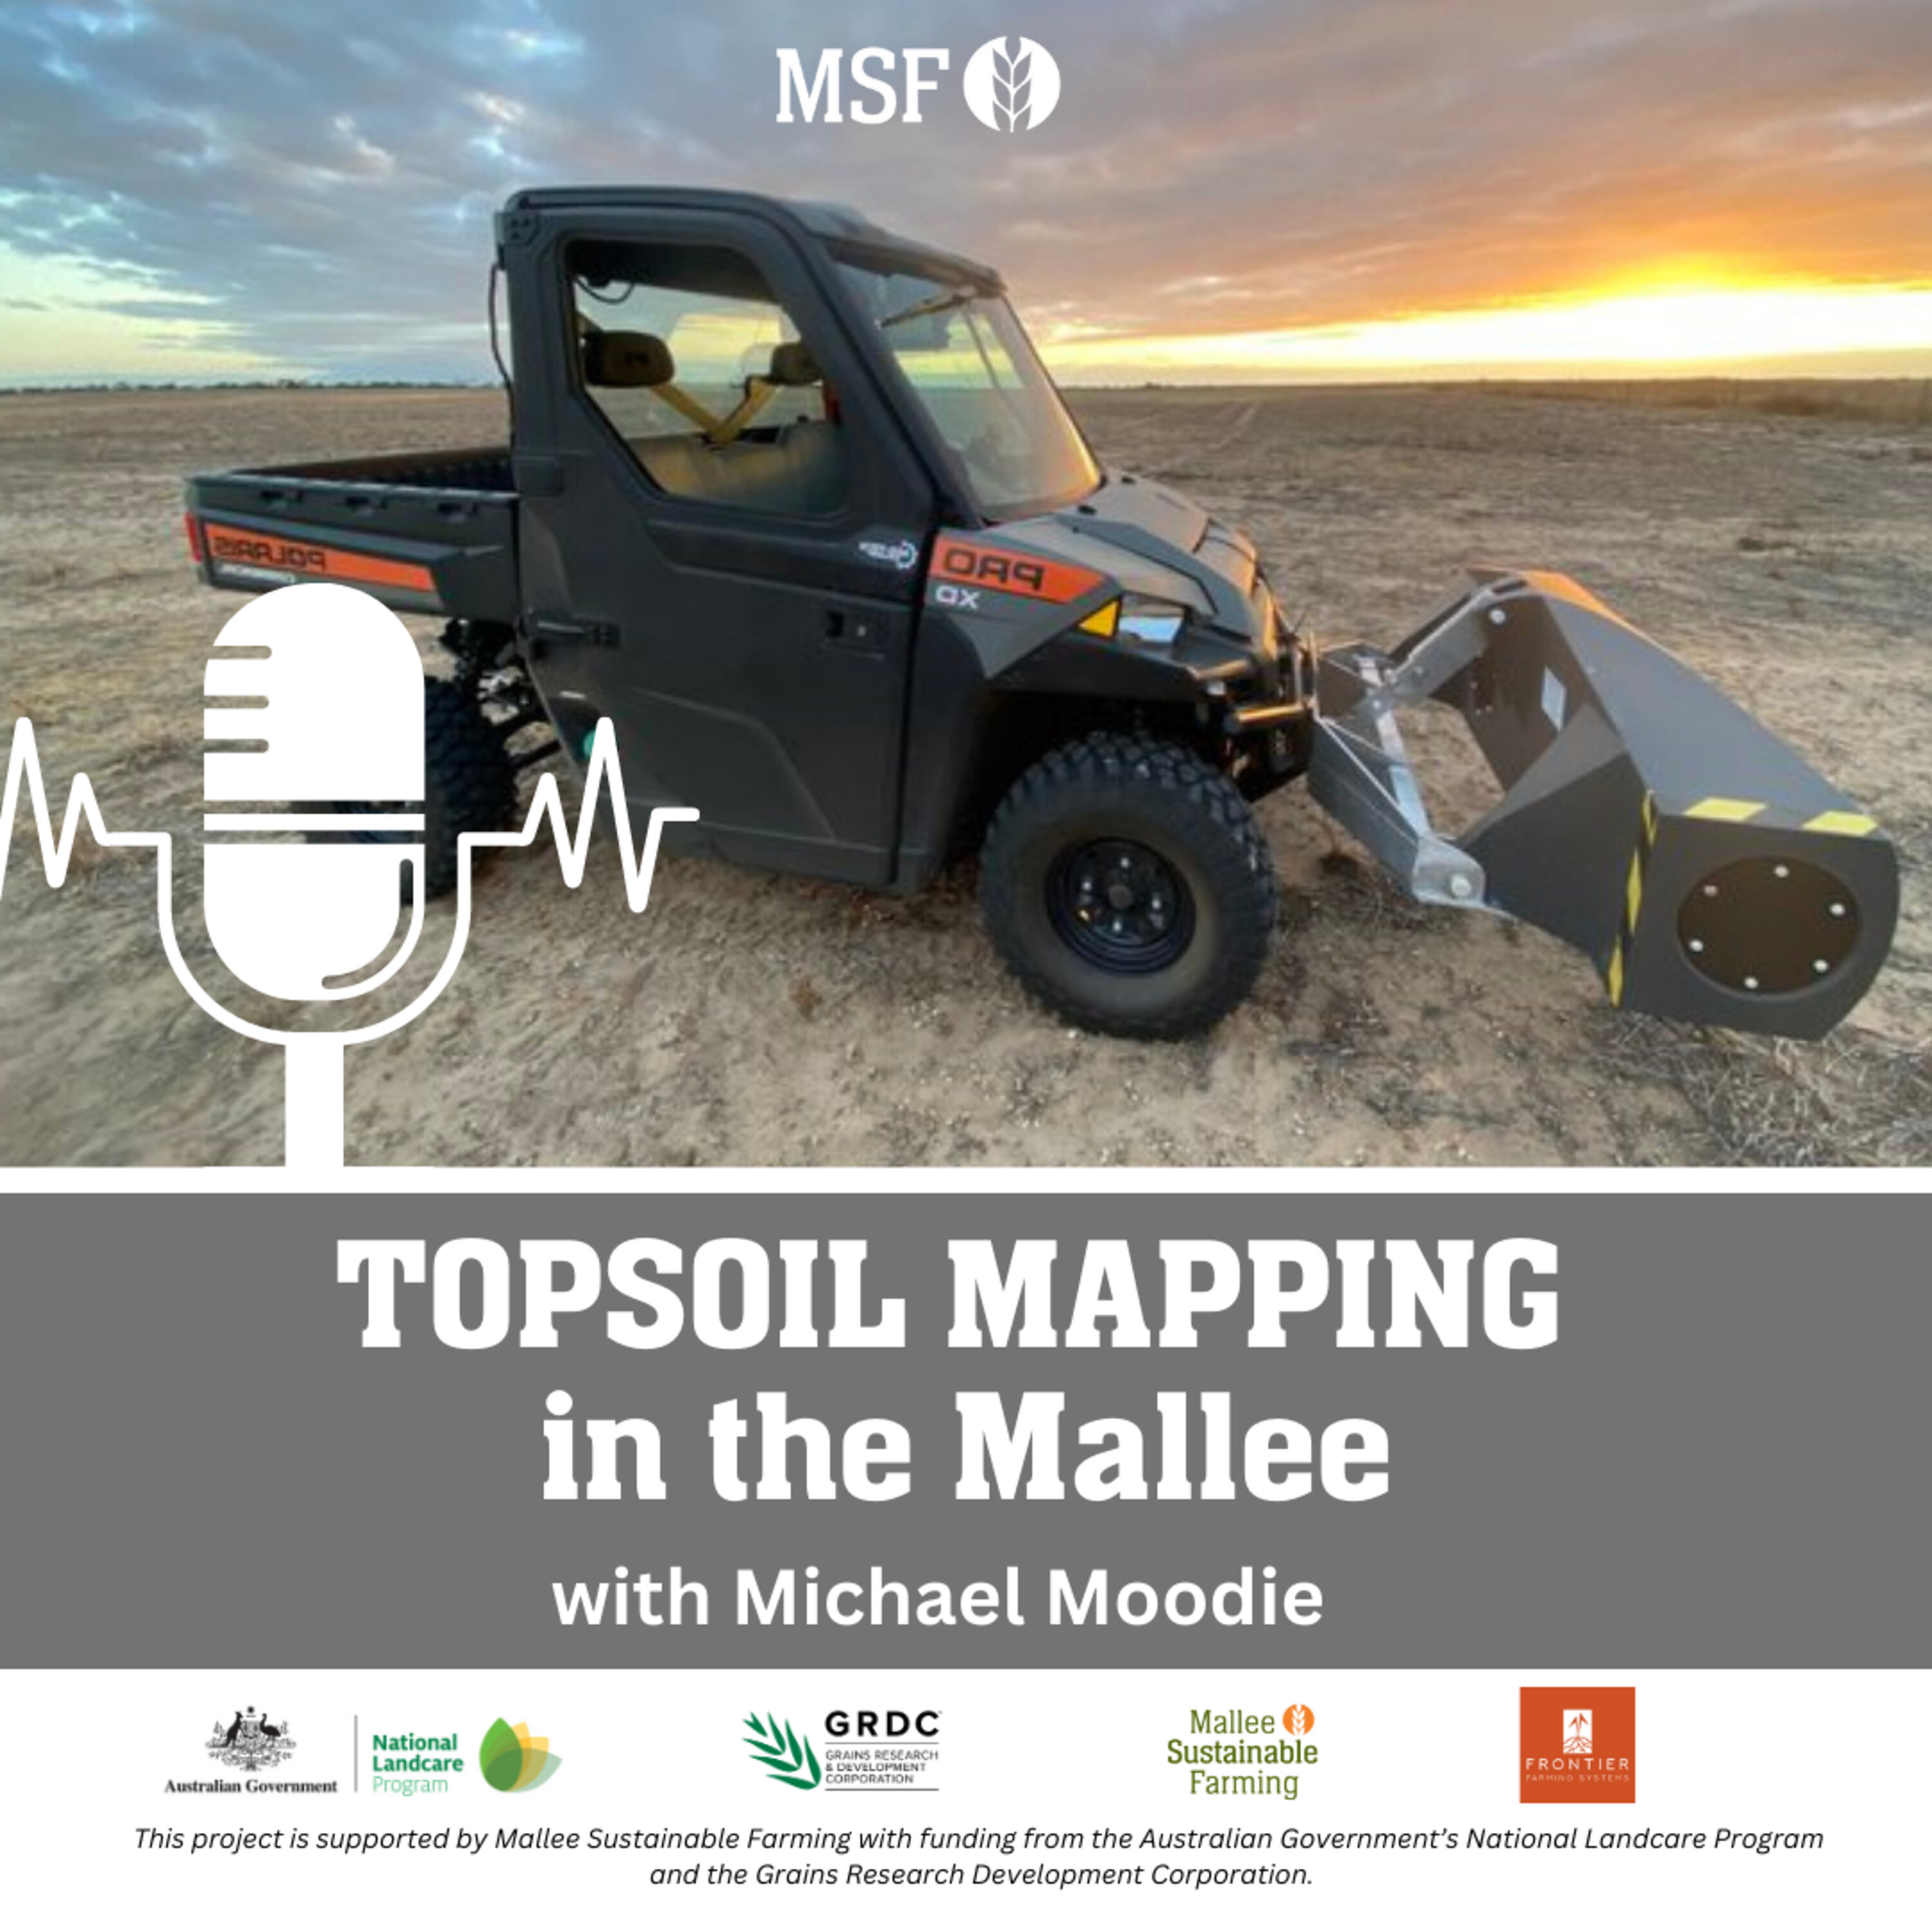 Topsoil mapping in the Mallee